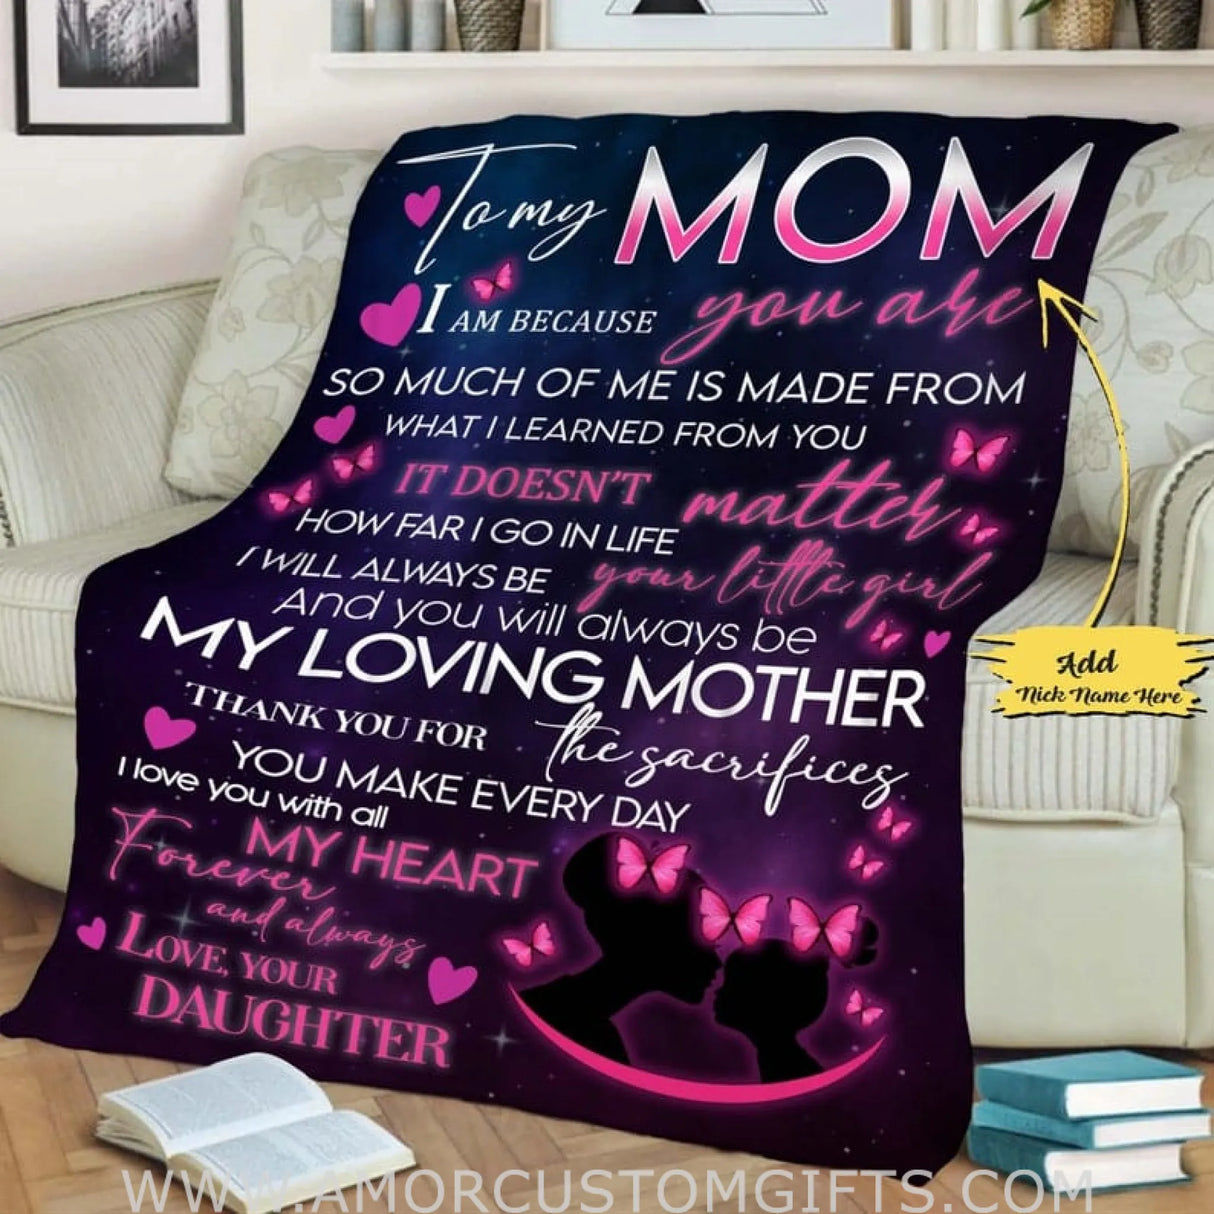 Blanket Mother's Day Gift For Mom, To My Mom Personalized Blanket From Daughter, Customized Gift For Mom, Fleece Blanket for her